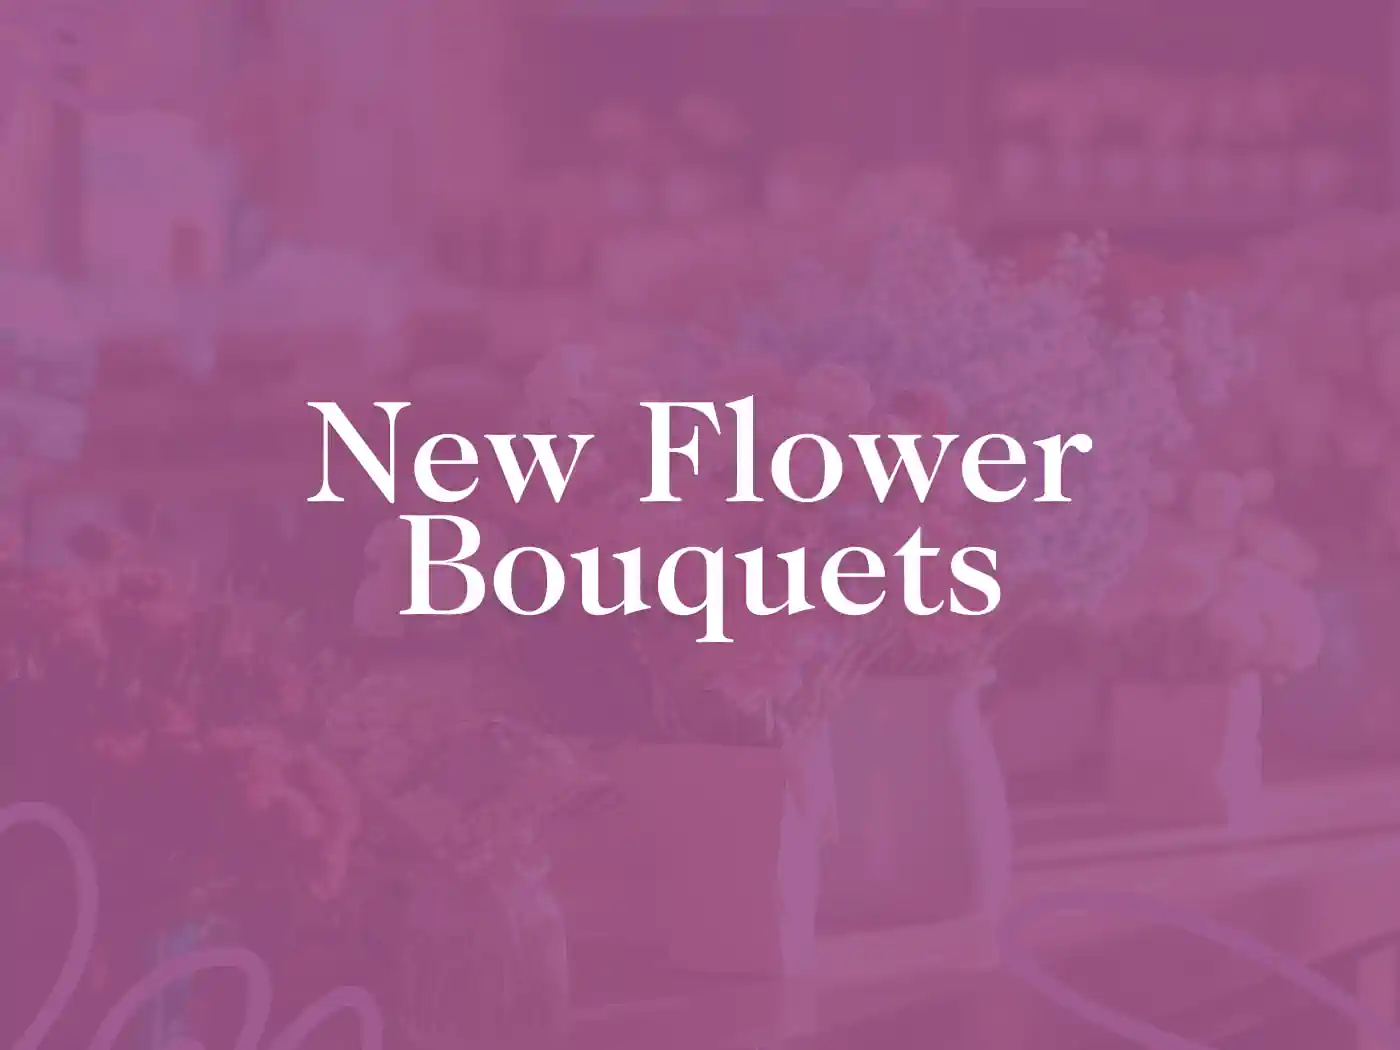 Assortment of fresh flower bouquets ready to enchant, available at Fabulous Flowers and Gifts.